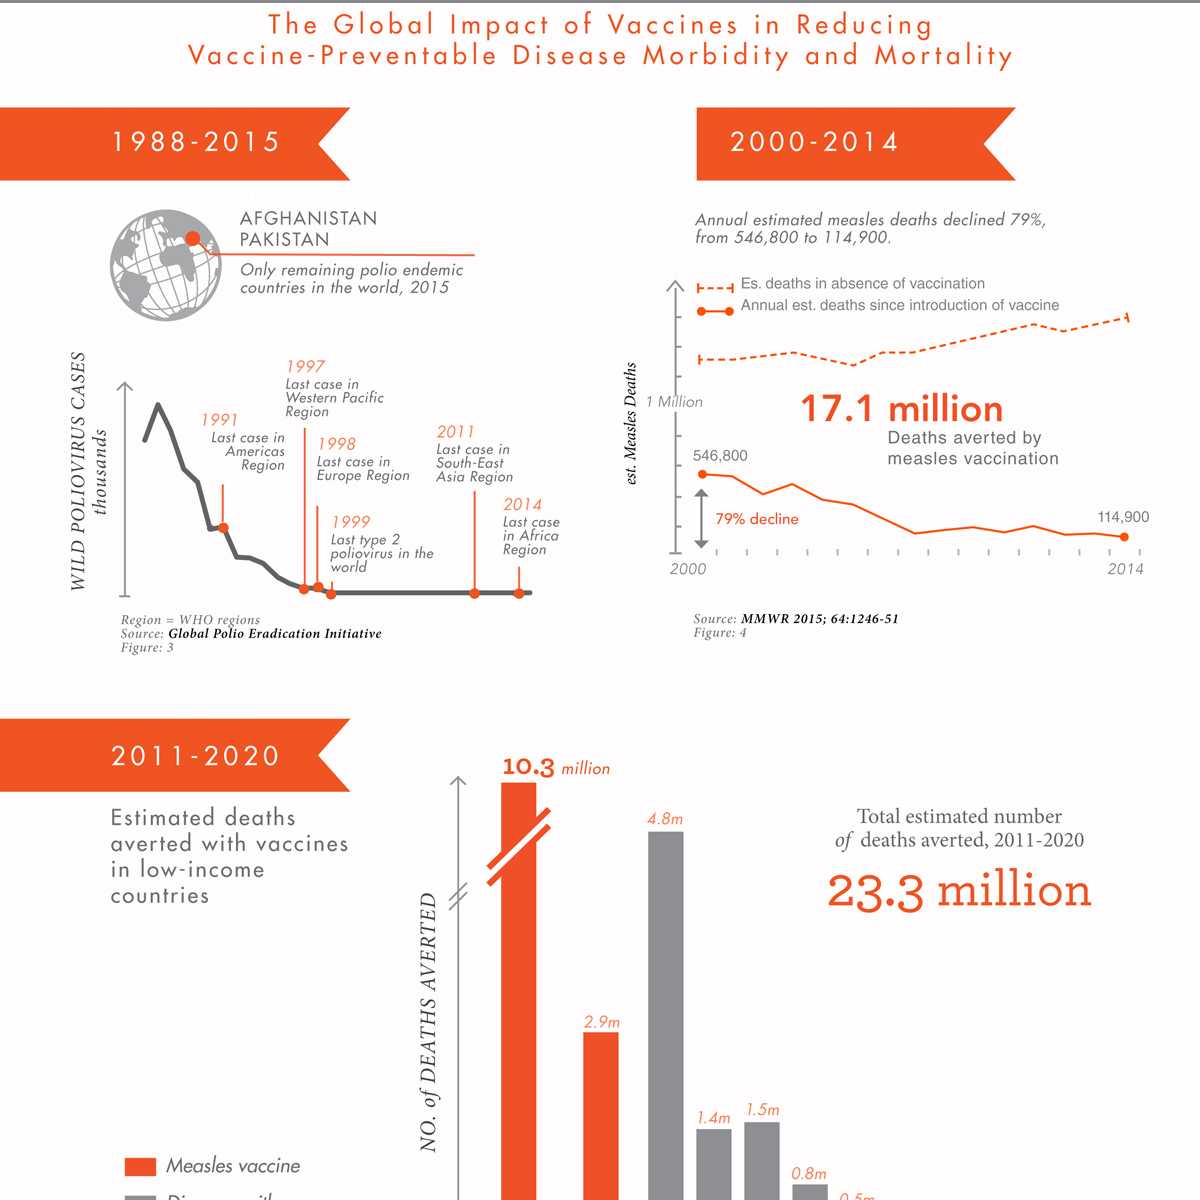 Infographic: The Global Impact of Vaccines in Reducing Vaccine-Preventable Disease Morbidity and Mortality